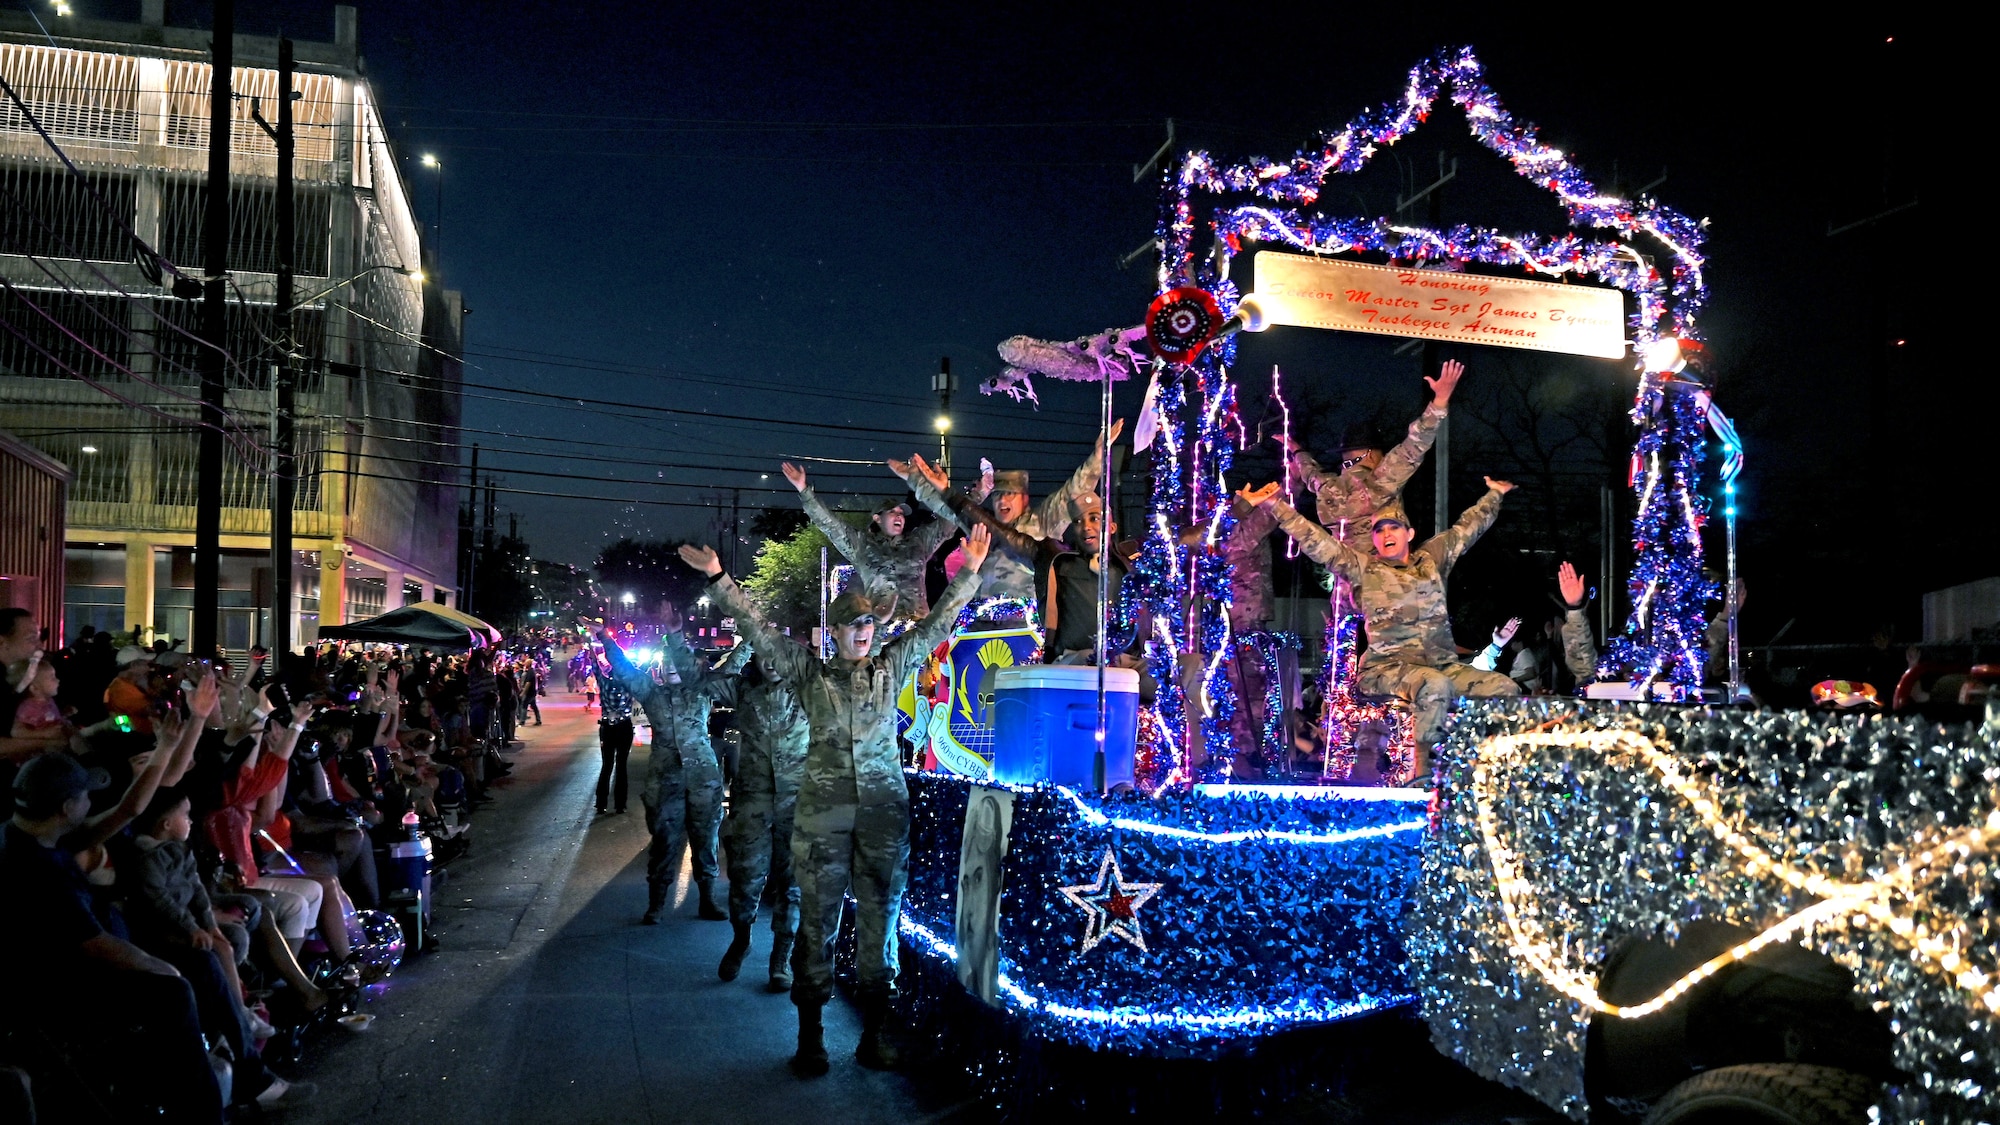 Reserve Citizen Airmen in the 433rd Airlift Wing, 960th Cyberspace Wing, 340th Flying Training Group and 23rd Intelligence Squadron sing along with the crowd during the Flambeau parade in downtown San Antonio, April 9, 2022. This was the first time the four South Texas Reserve units worked together on a float for the annual Fiesta celebration. (U.S. Air Force photo by Master Sgt. Samantha Mathison)